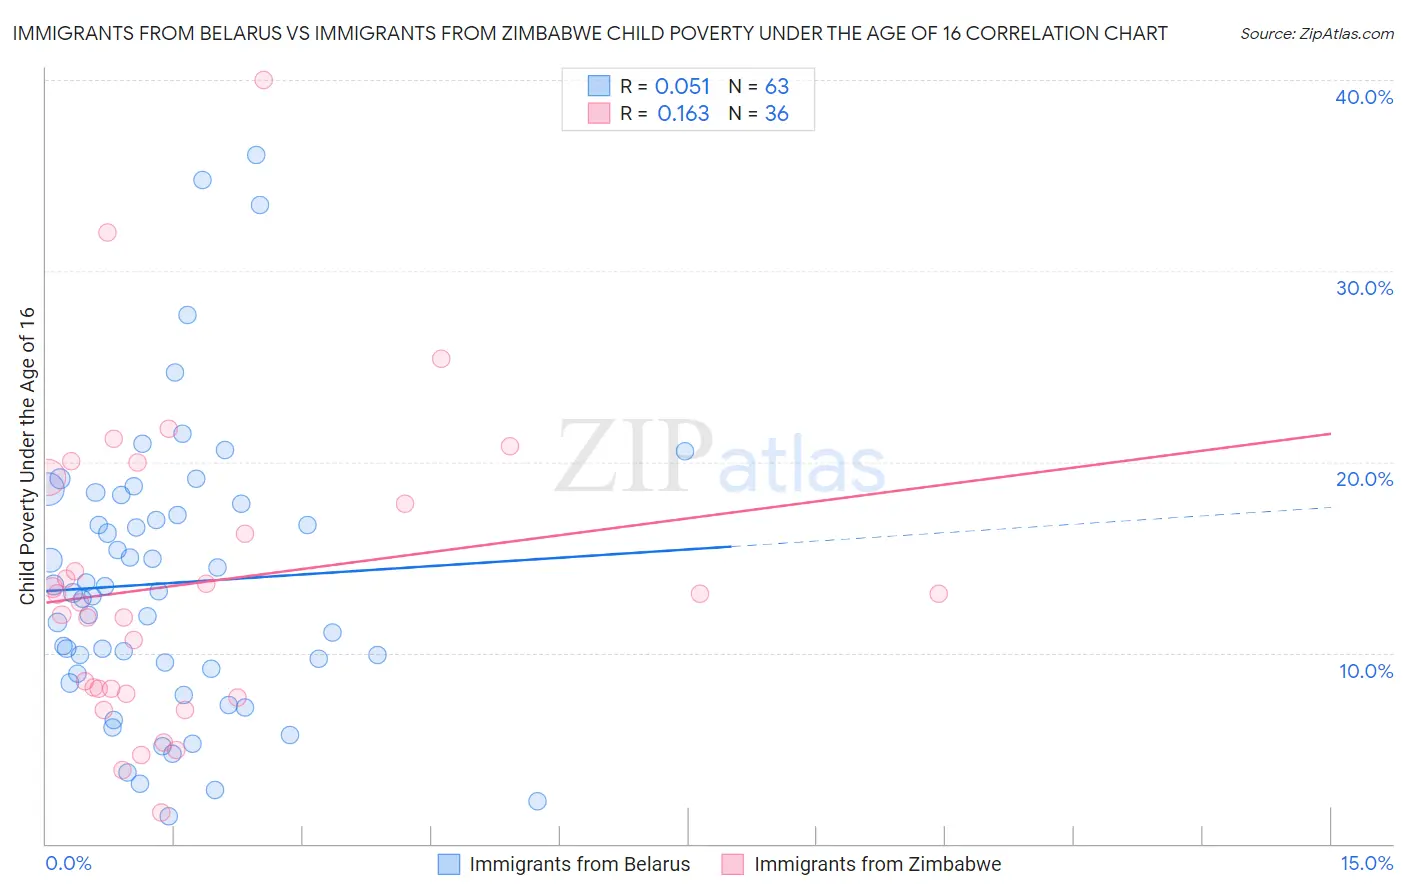 Immigrants from Belarus vs Immigrants from Zimbabwe Child Poverty Under the Age of 16